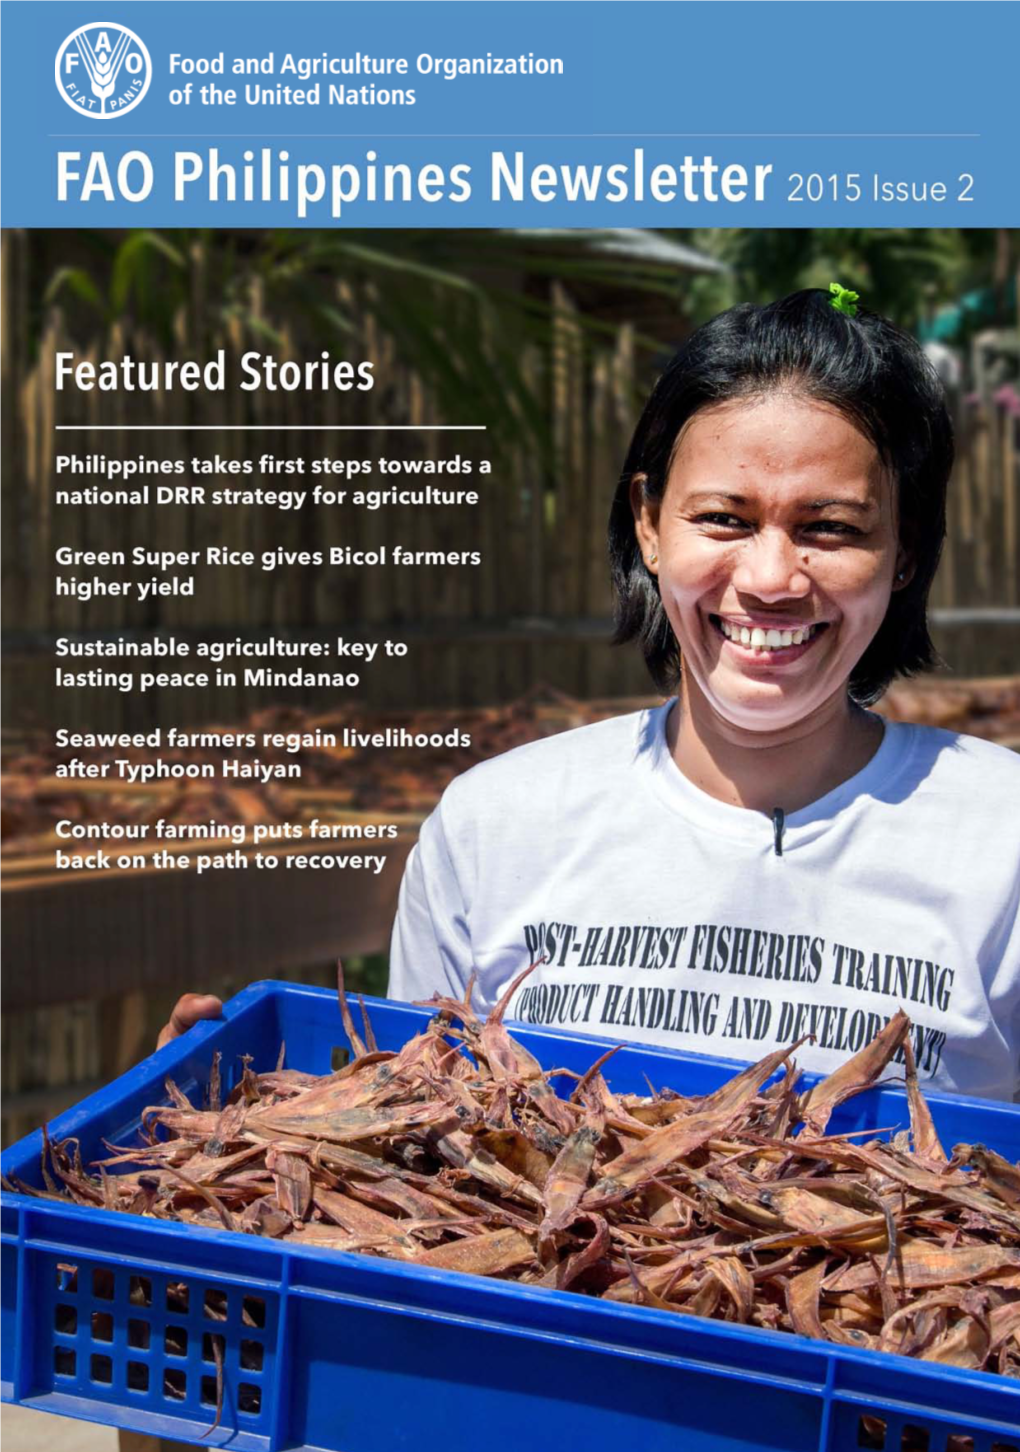 FAO Philippines Newsletter 2015 Issue 2